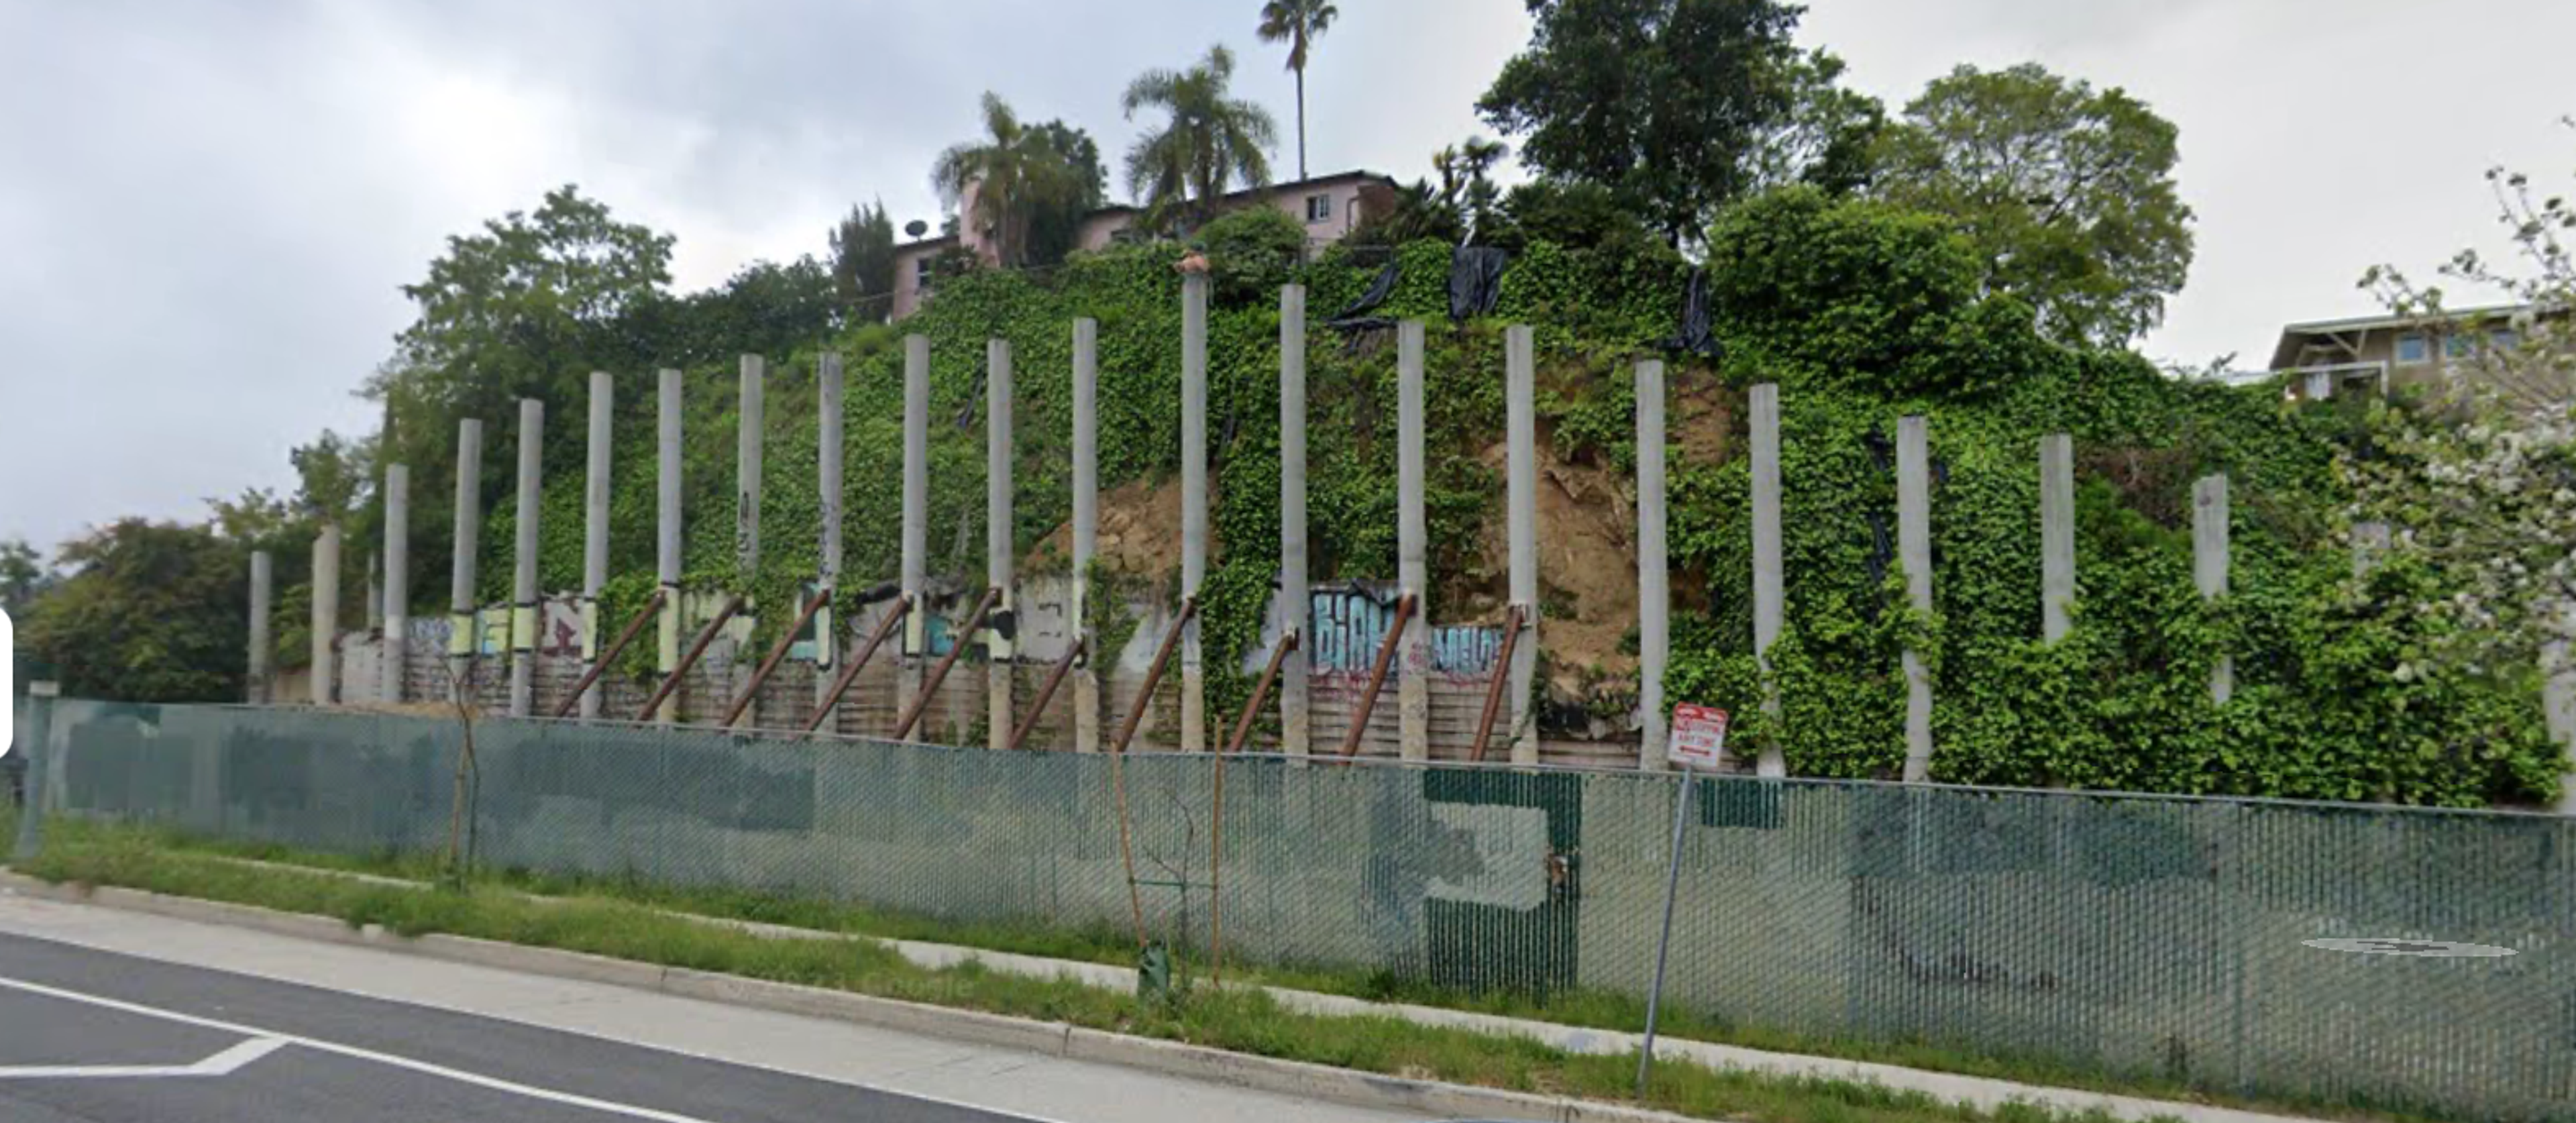 Picture of "Pillarhenge", which is an undeveloped lot with over twenty pillars from an abandoned project. The lot is behind construction fencing and has some graffiti tags.